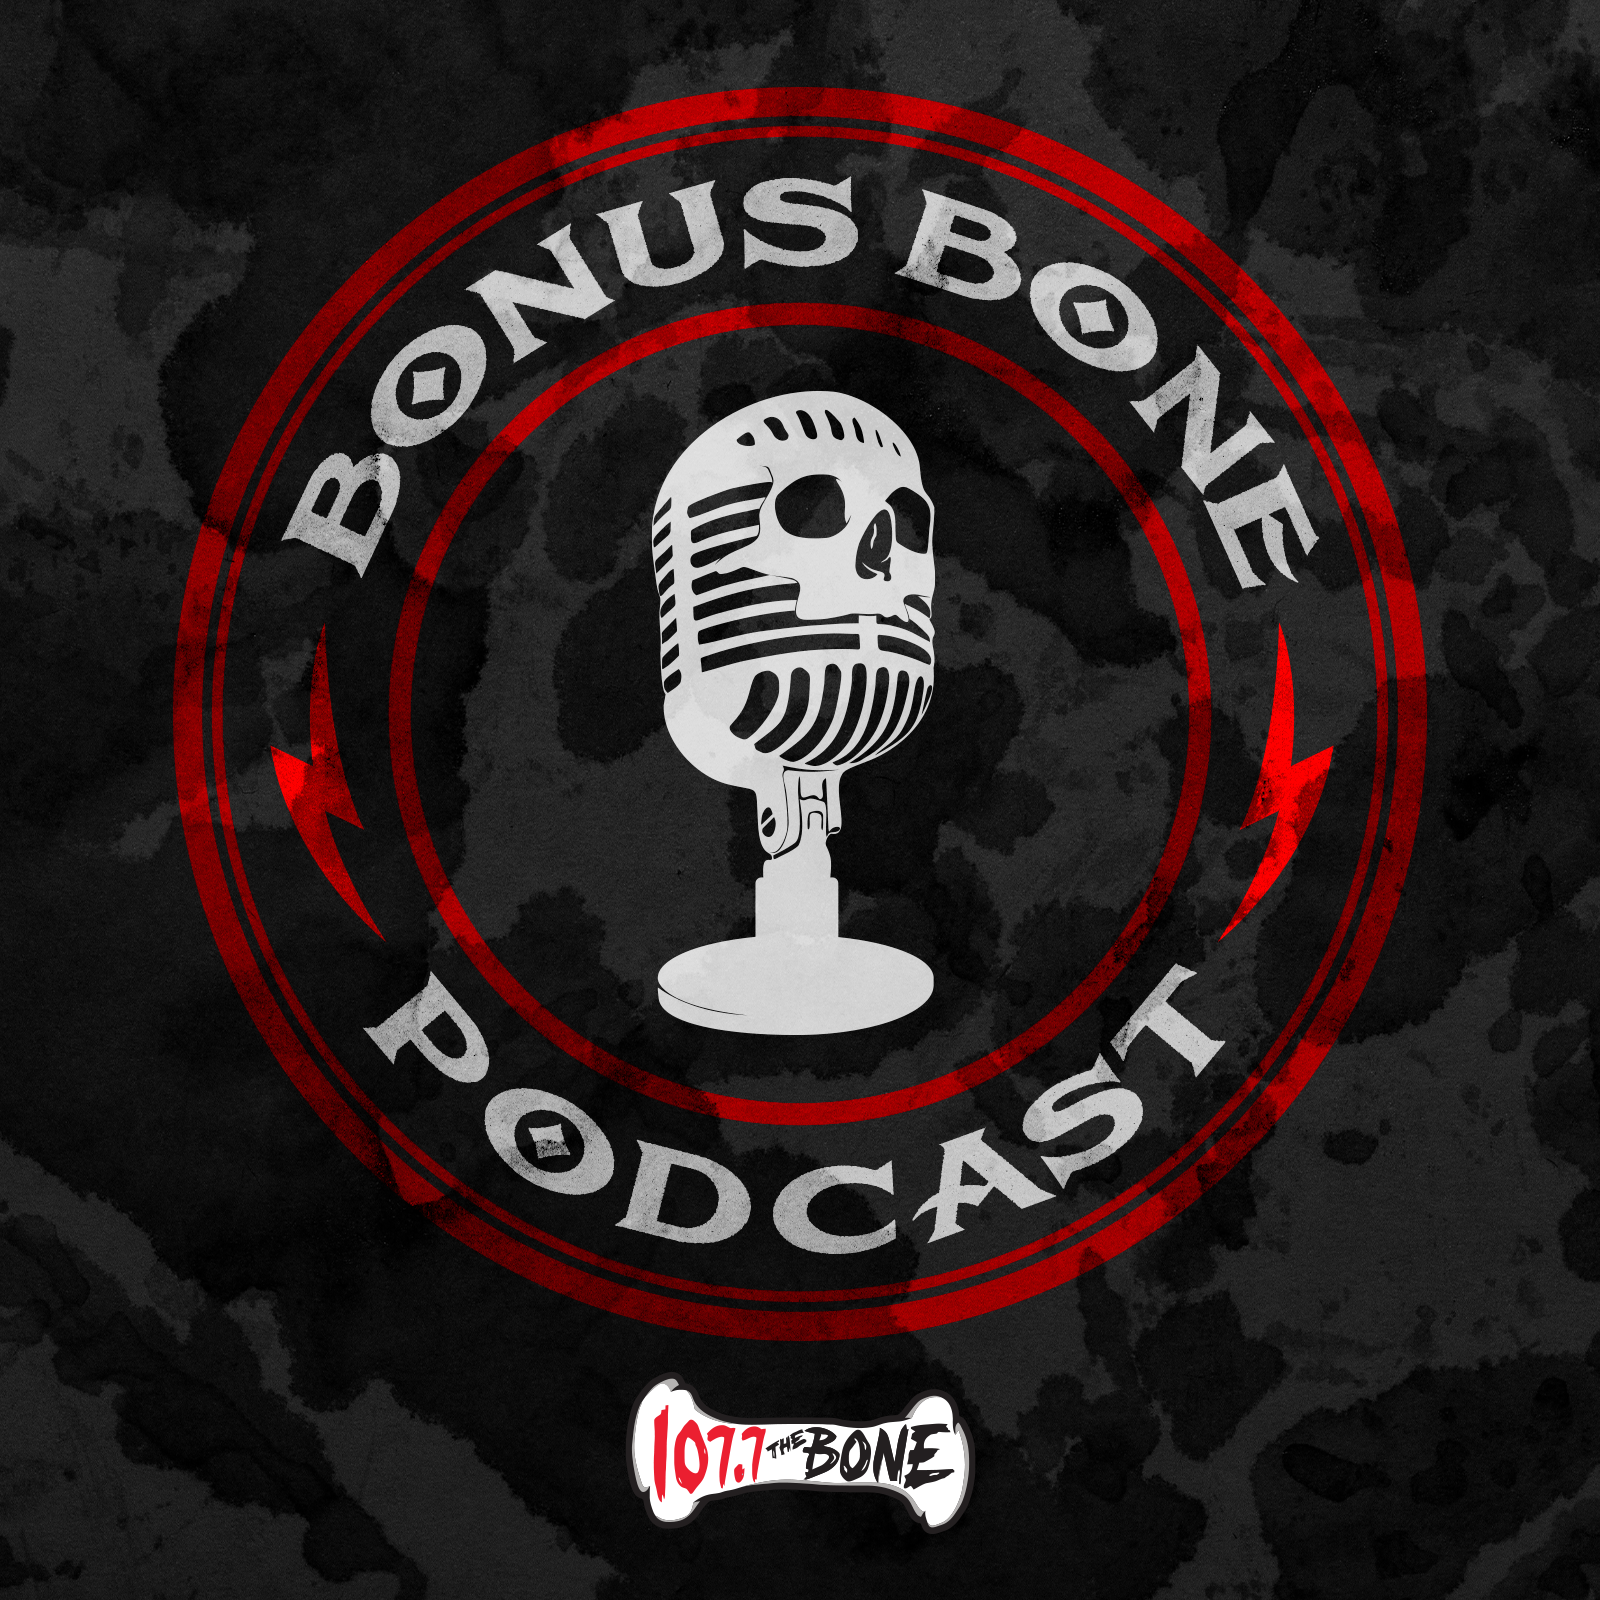 The Bonus Bone: What Are Some Things That Our Bodies Can't Handle Anymore?